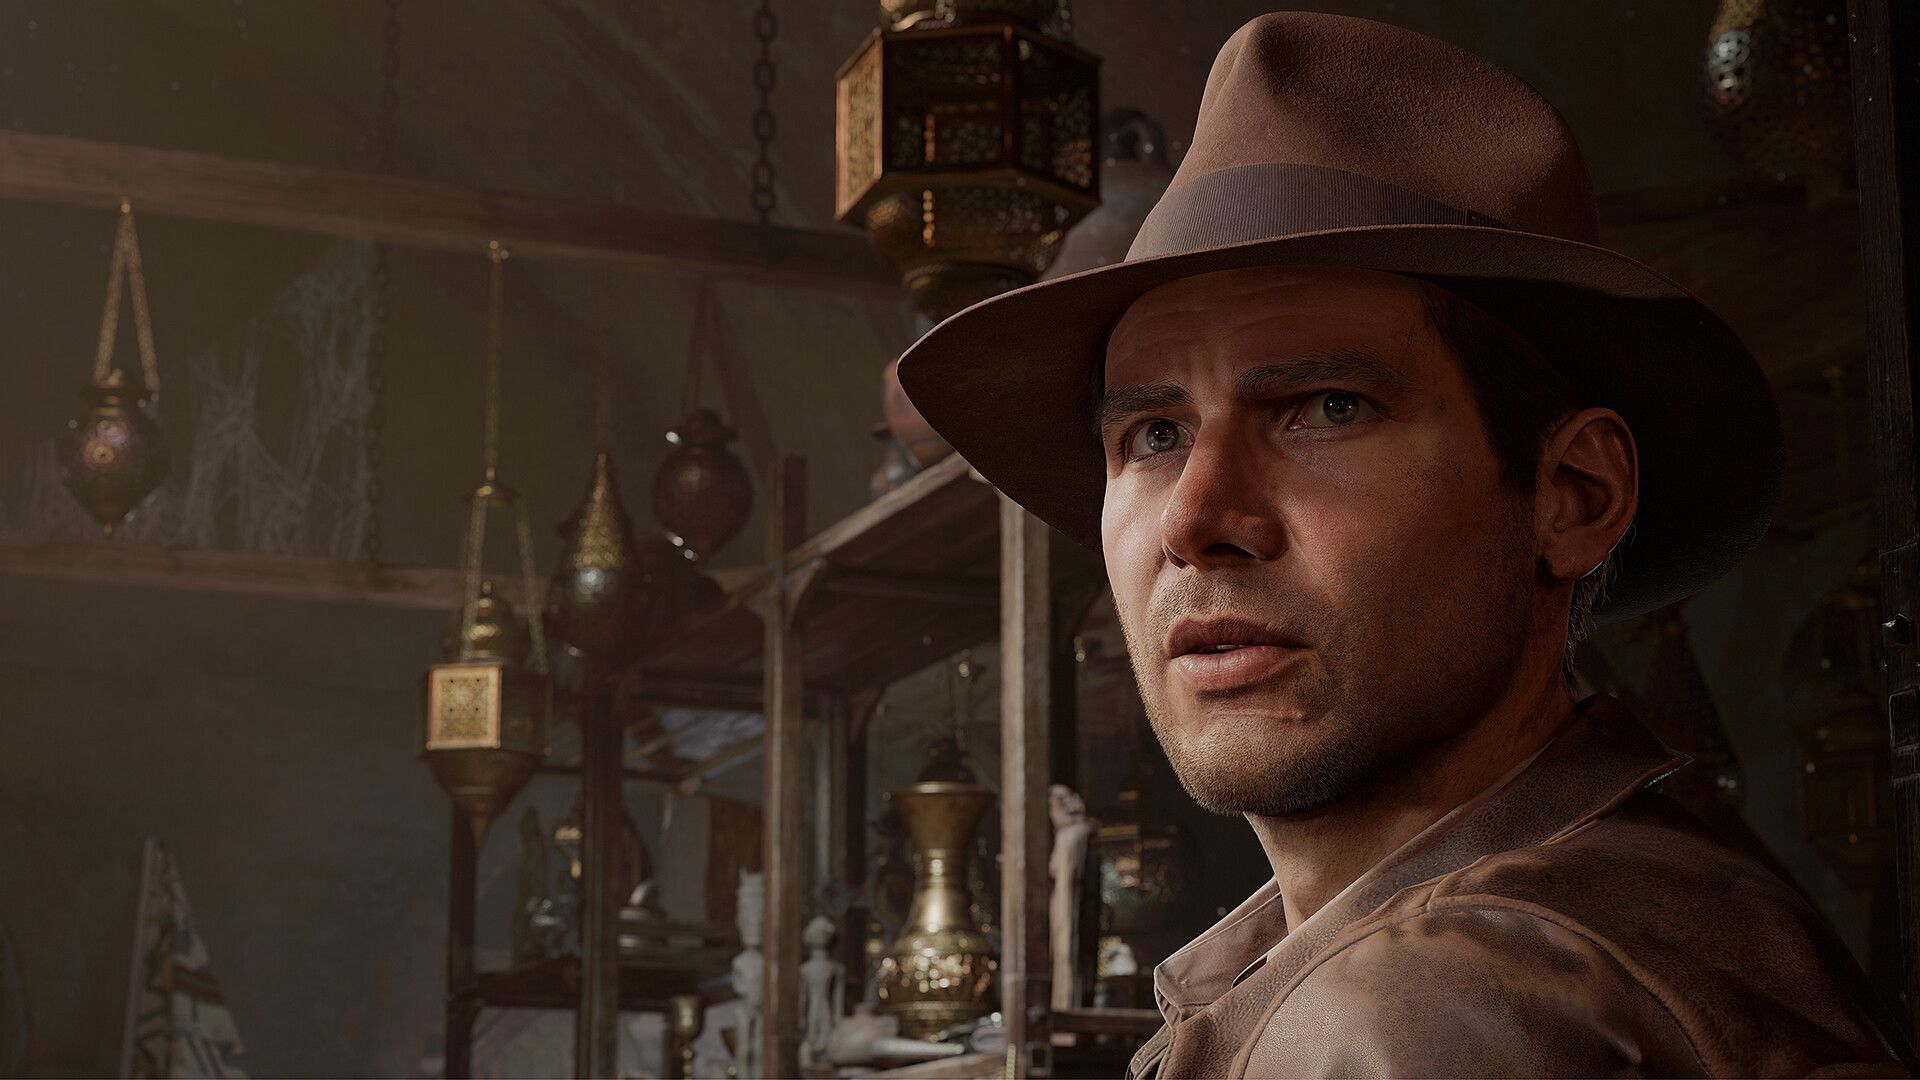 Indiana Jones and the Great Circle release date (expected), preorder